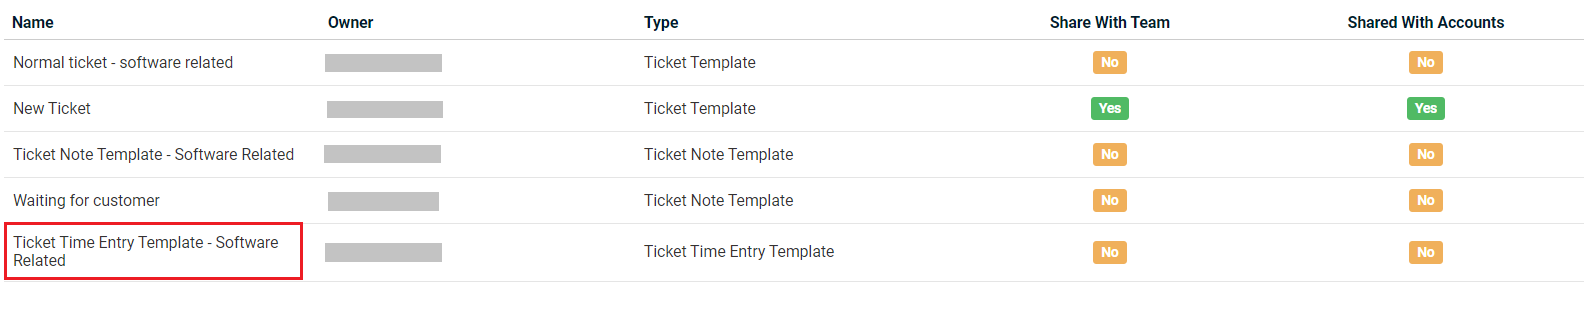 new_ticket_time_entry_template_3.PNG